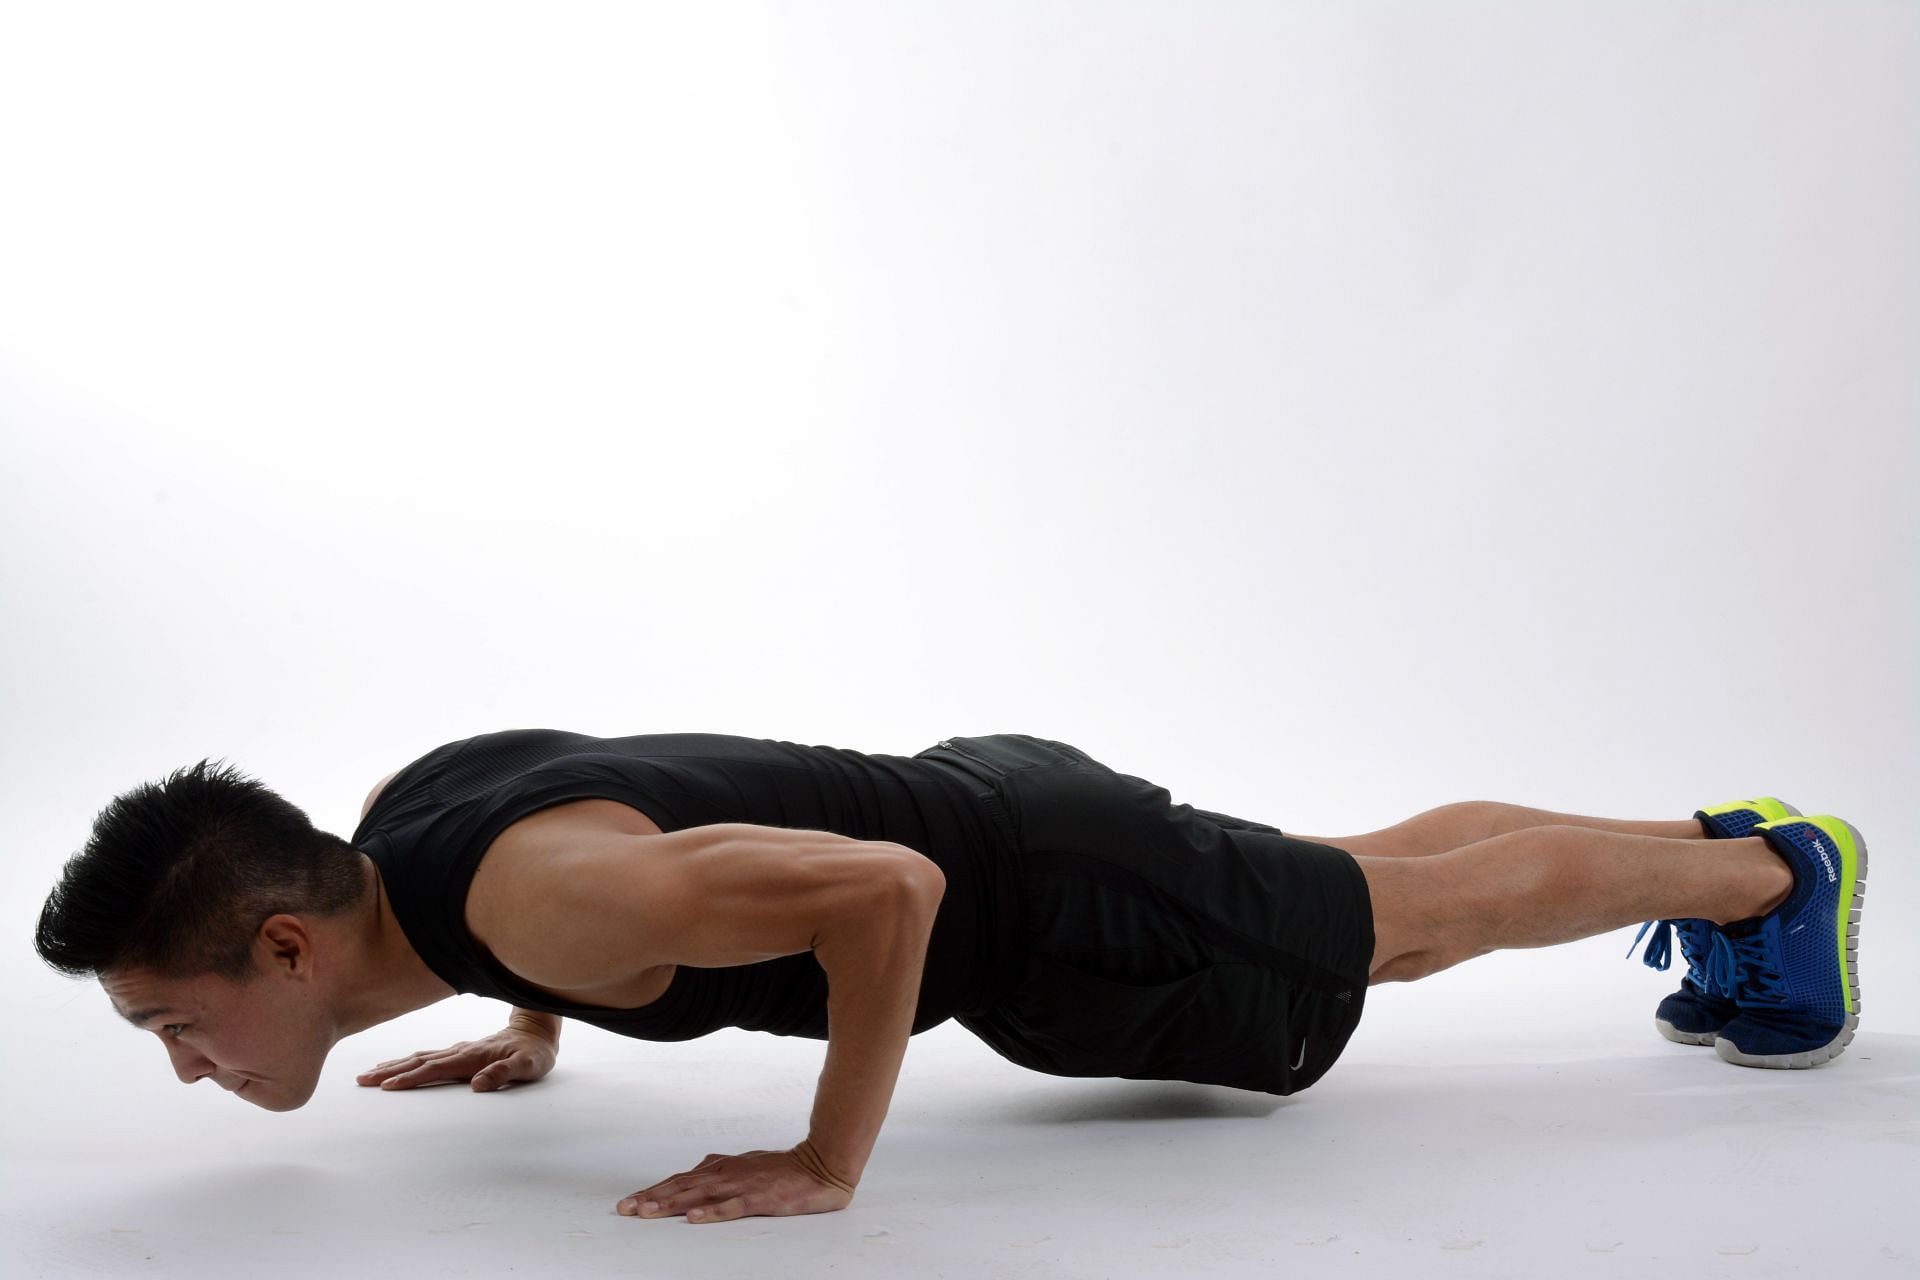 Push-ups are one of the best exercises to train the triceps. (Image via Pexels/Keiji Yoshiki)